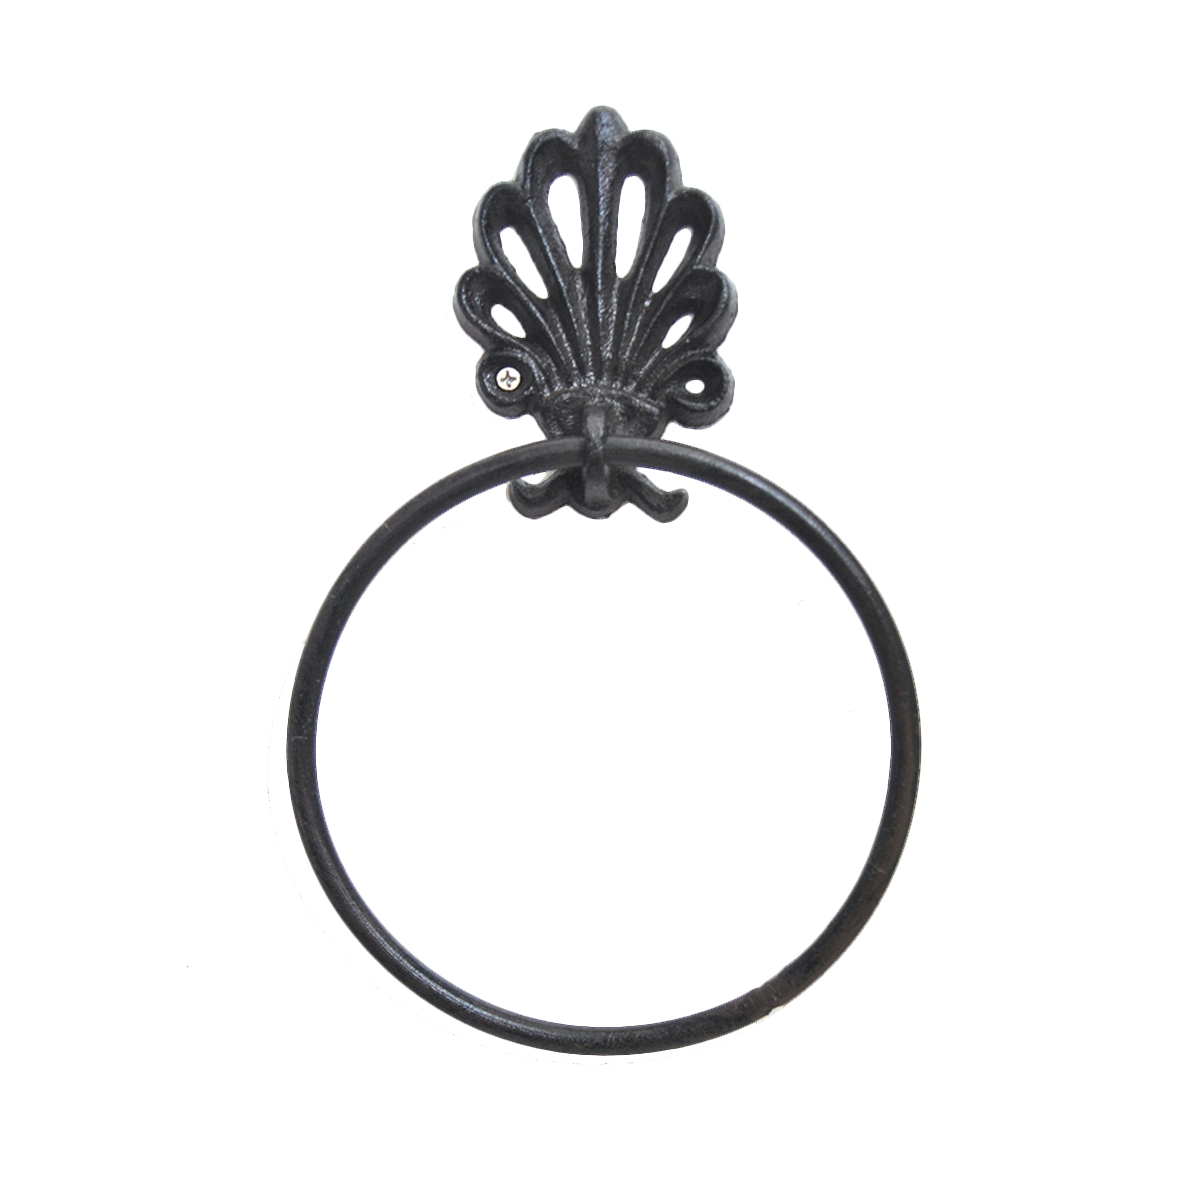 1PC Towel Ring Wrought Iron American Round Shaped Household Vintage Towel Rack Holder for Home Decor Bathroom Toliet